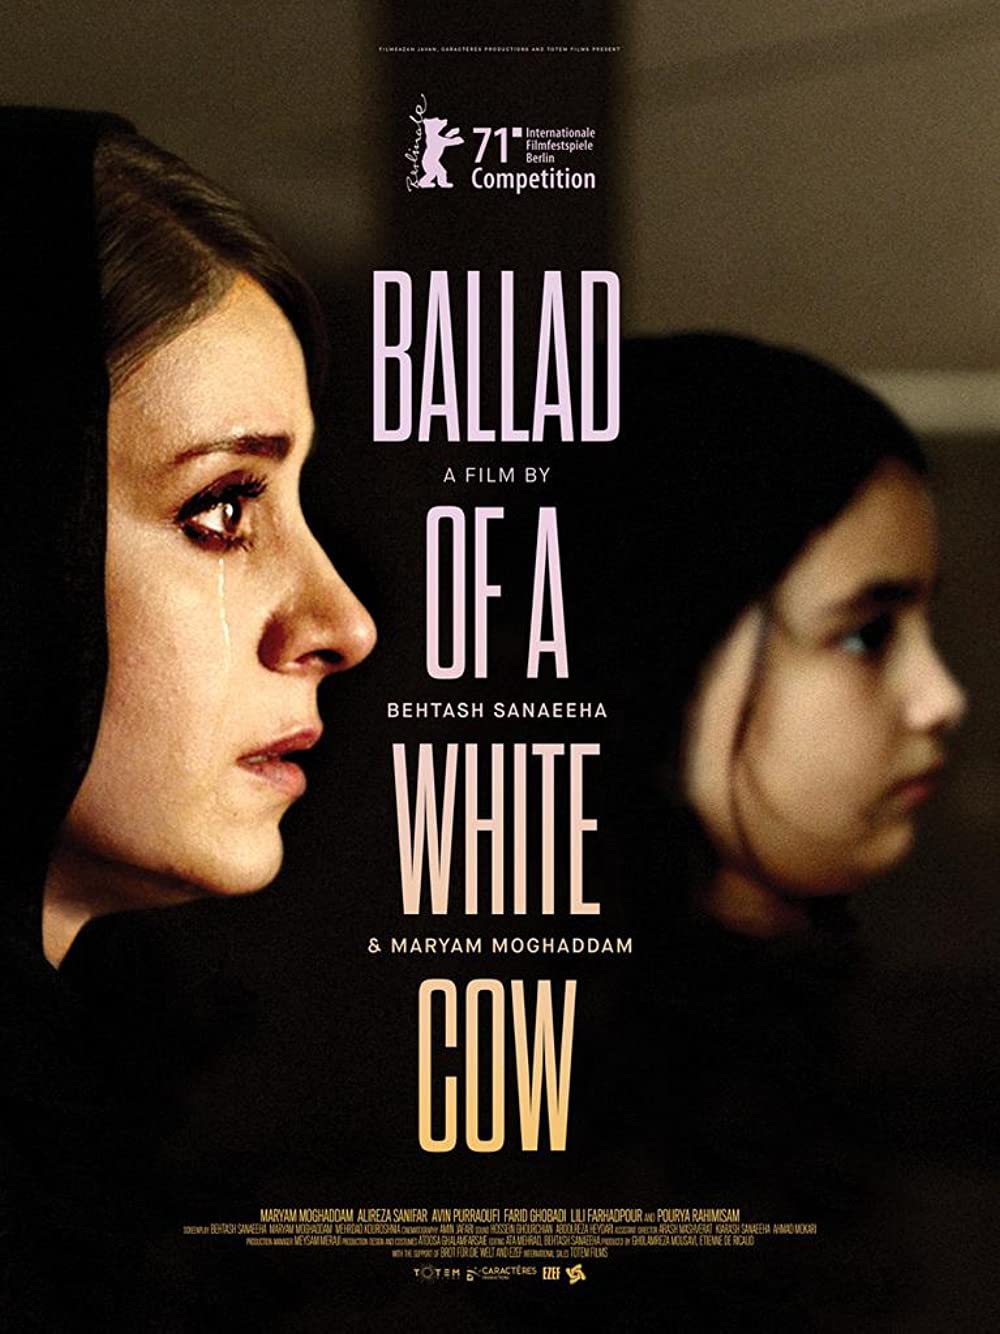 Ballad of a White Cow (Ghasideyeh gave sefid) :: Movie Review